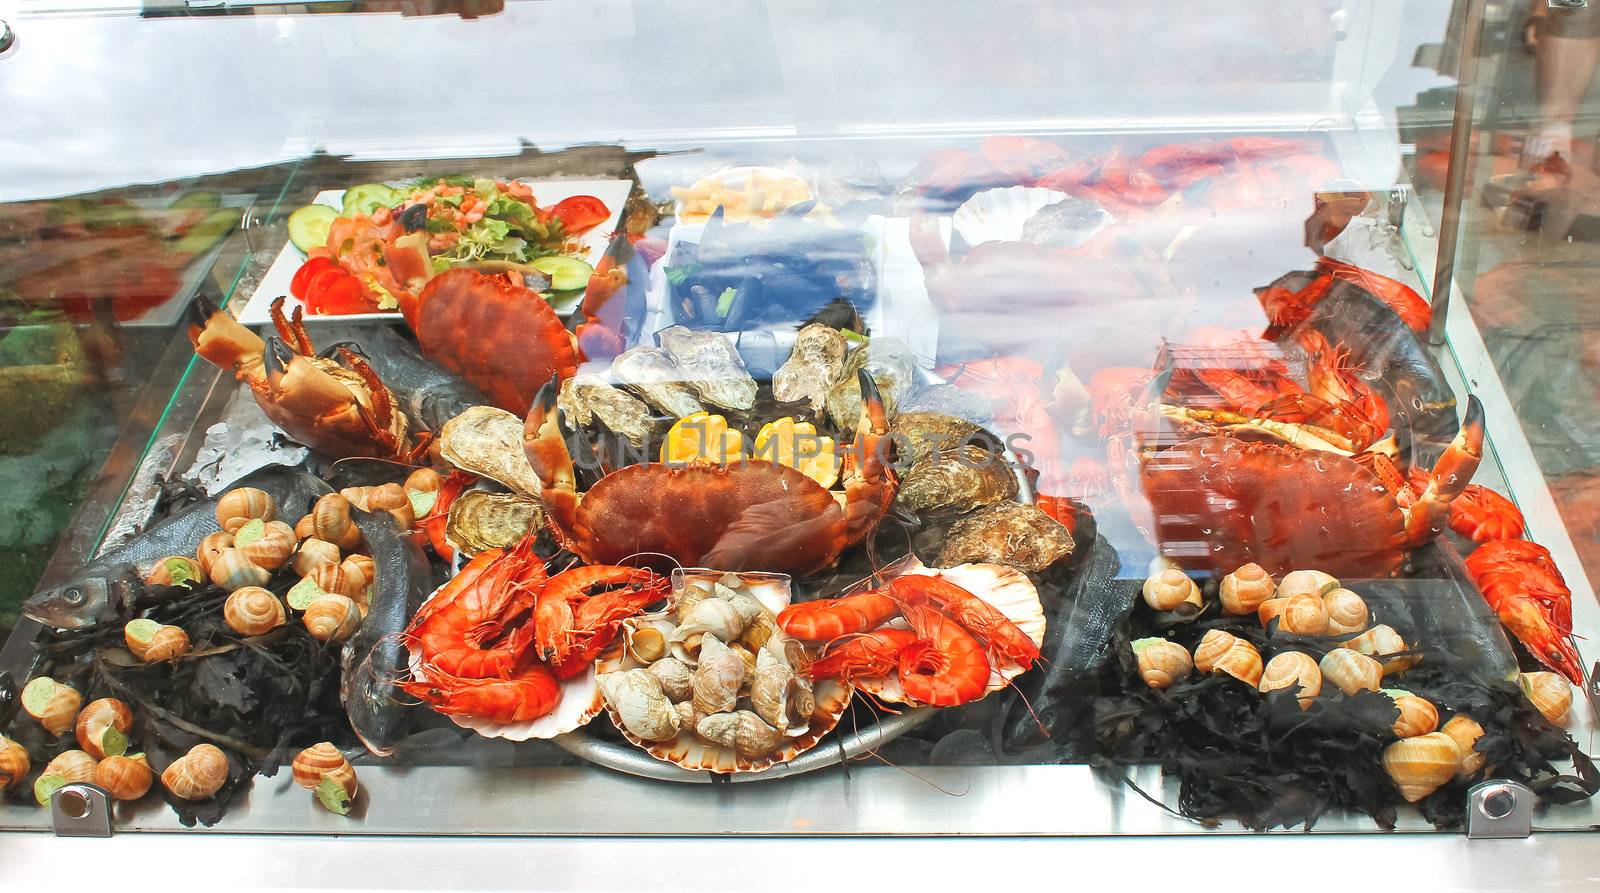 Seafood on display in the restaurant. by NickNick